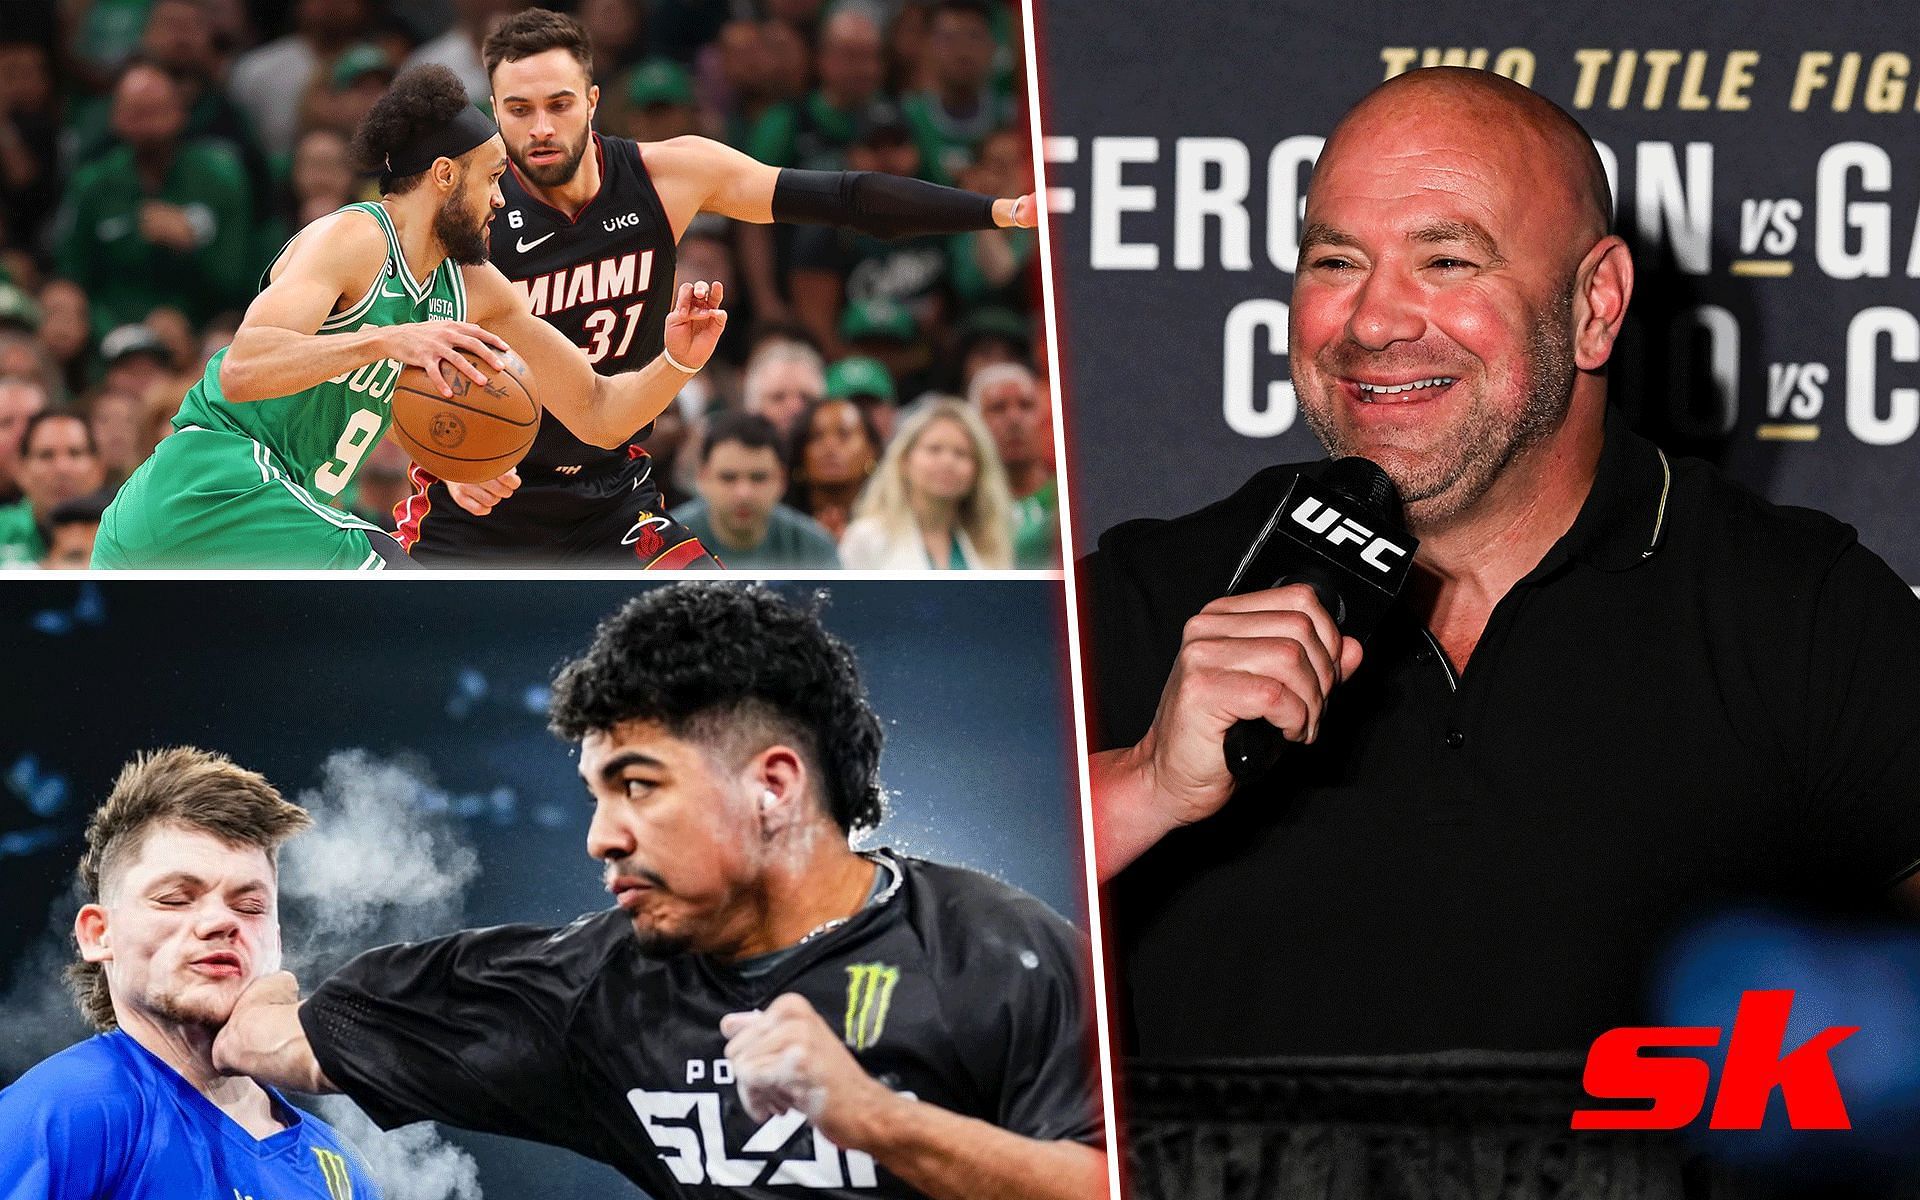 Miami Heat vs. Boston Celtics and Power Slap 2 (left) and Dana White (right) [Image credits: Getty Images and @powerslap on Instagram]